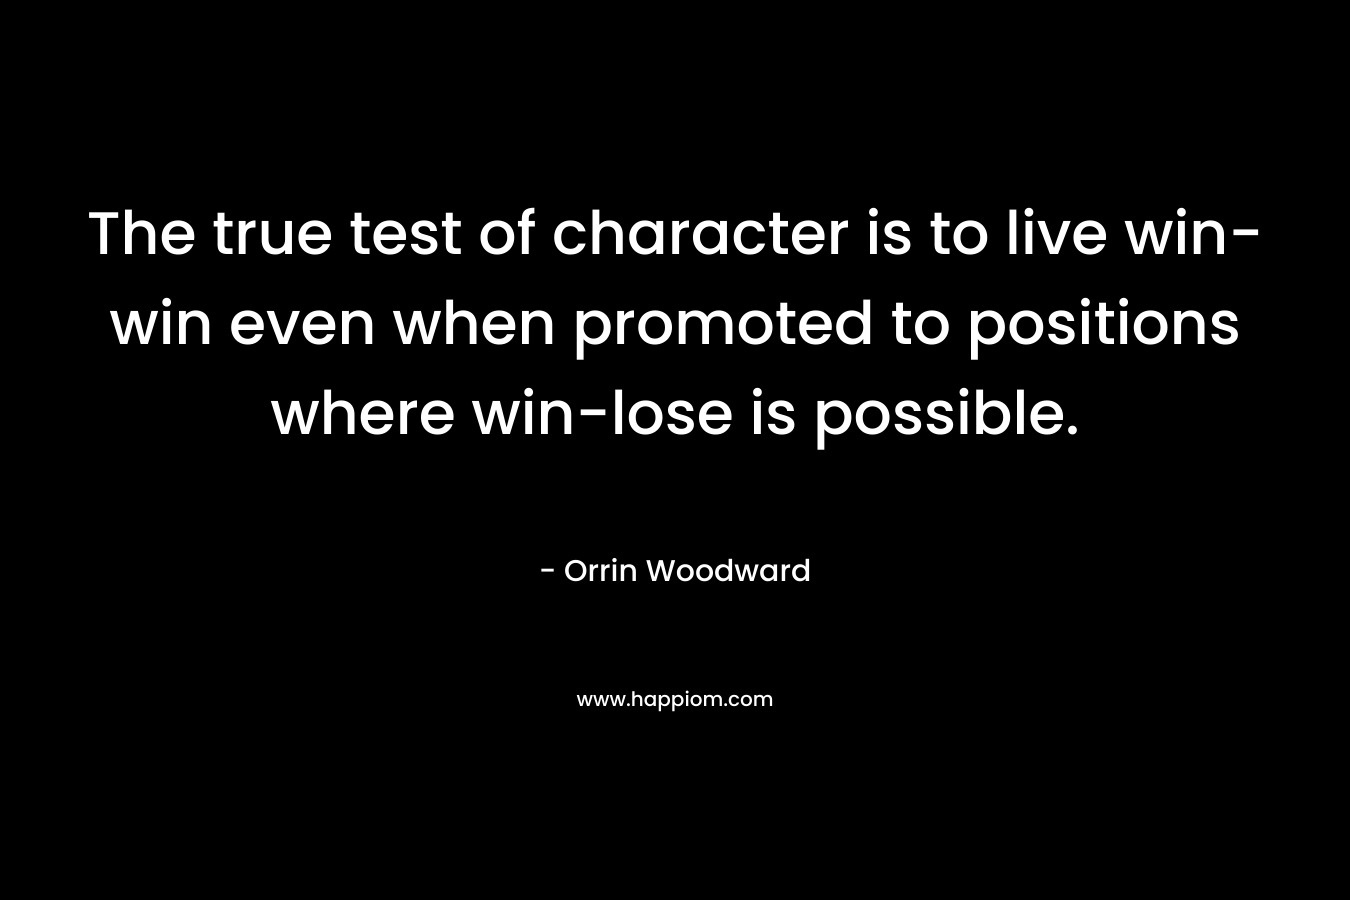 The true test of character is to live win-win even when promoted to positions where win-lose is possible. – Orrin Woodward